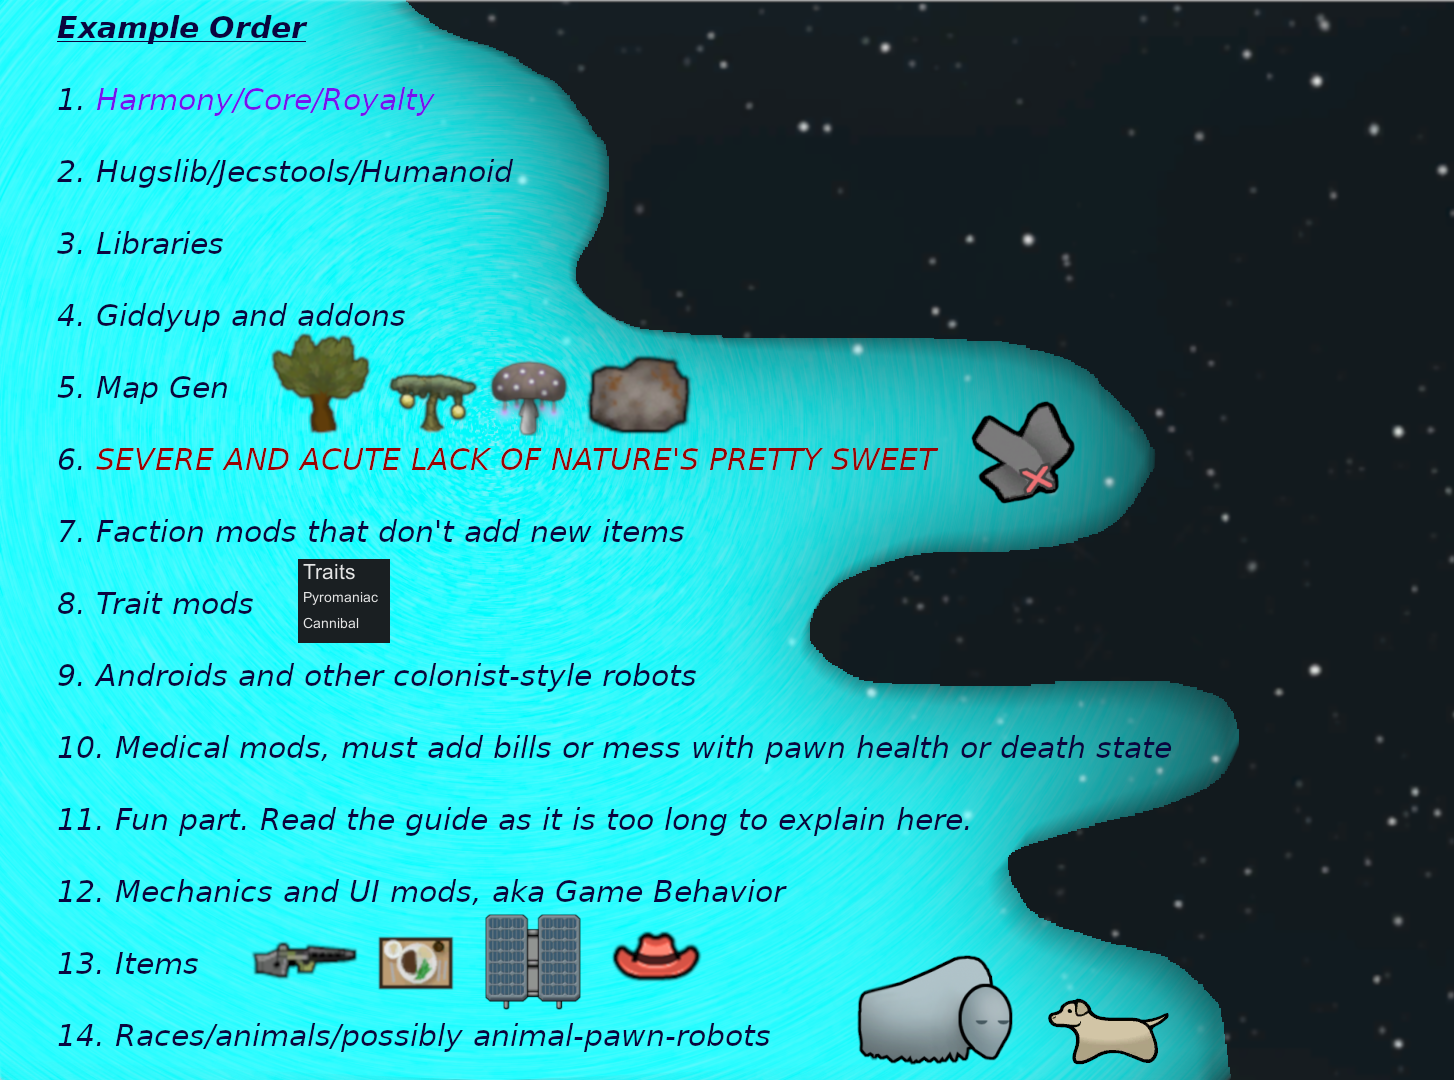 Mod order example image.png